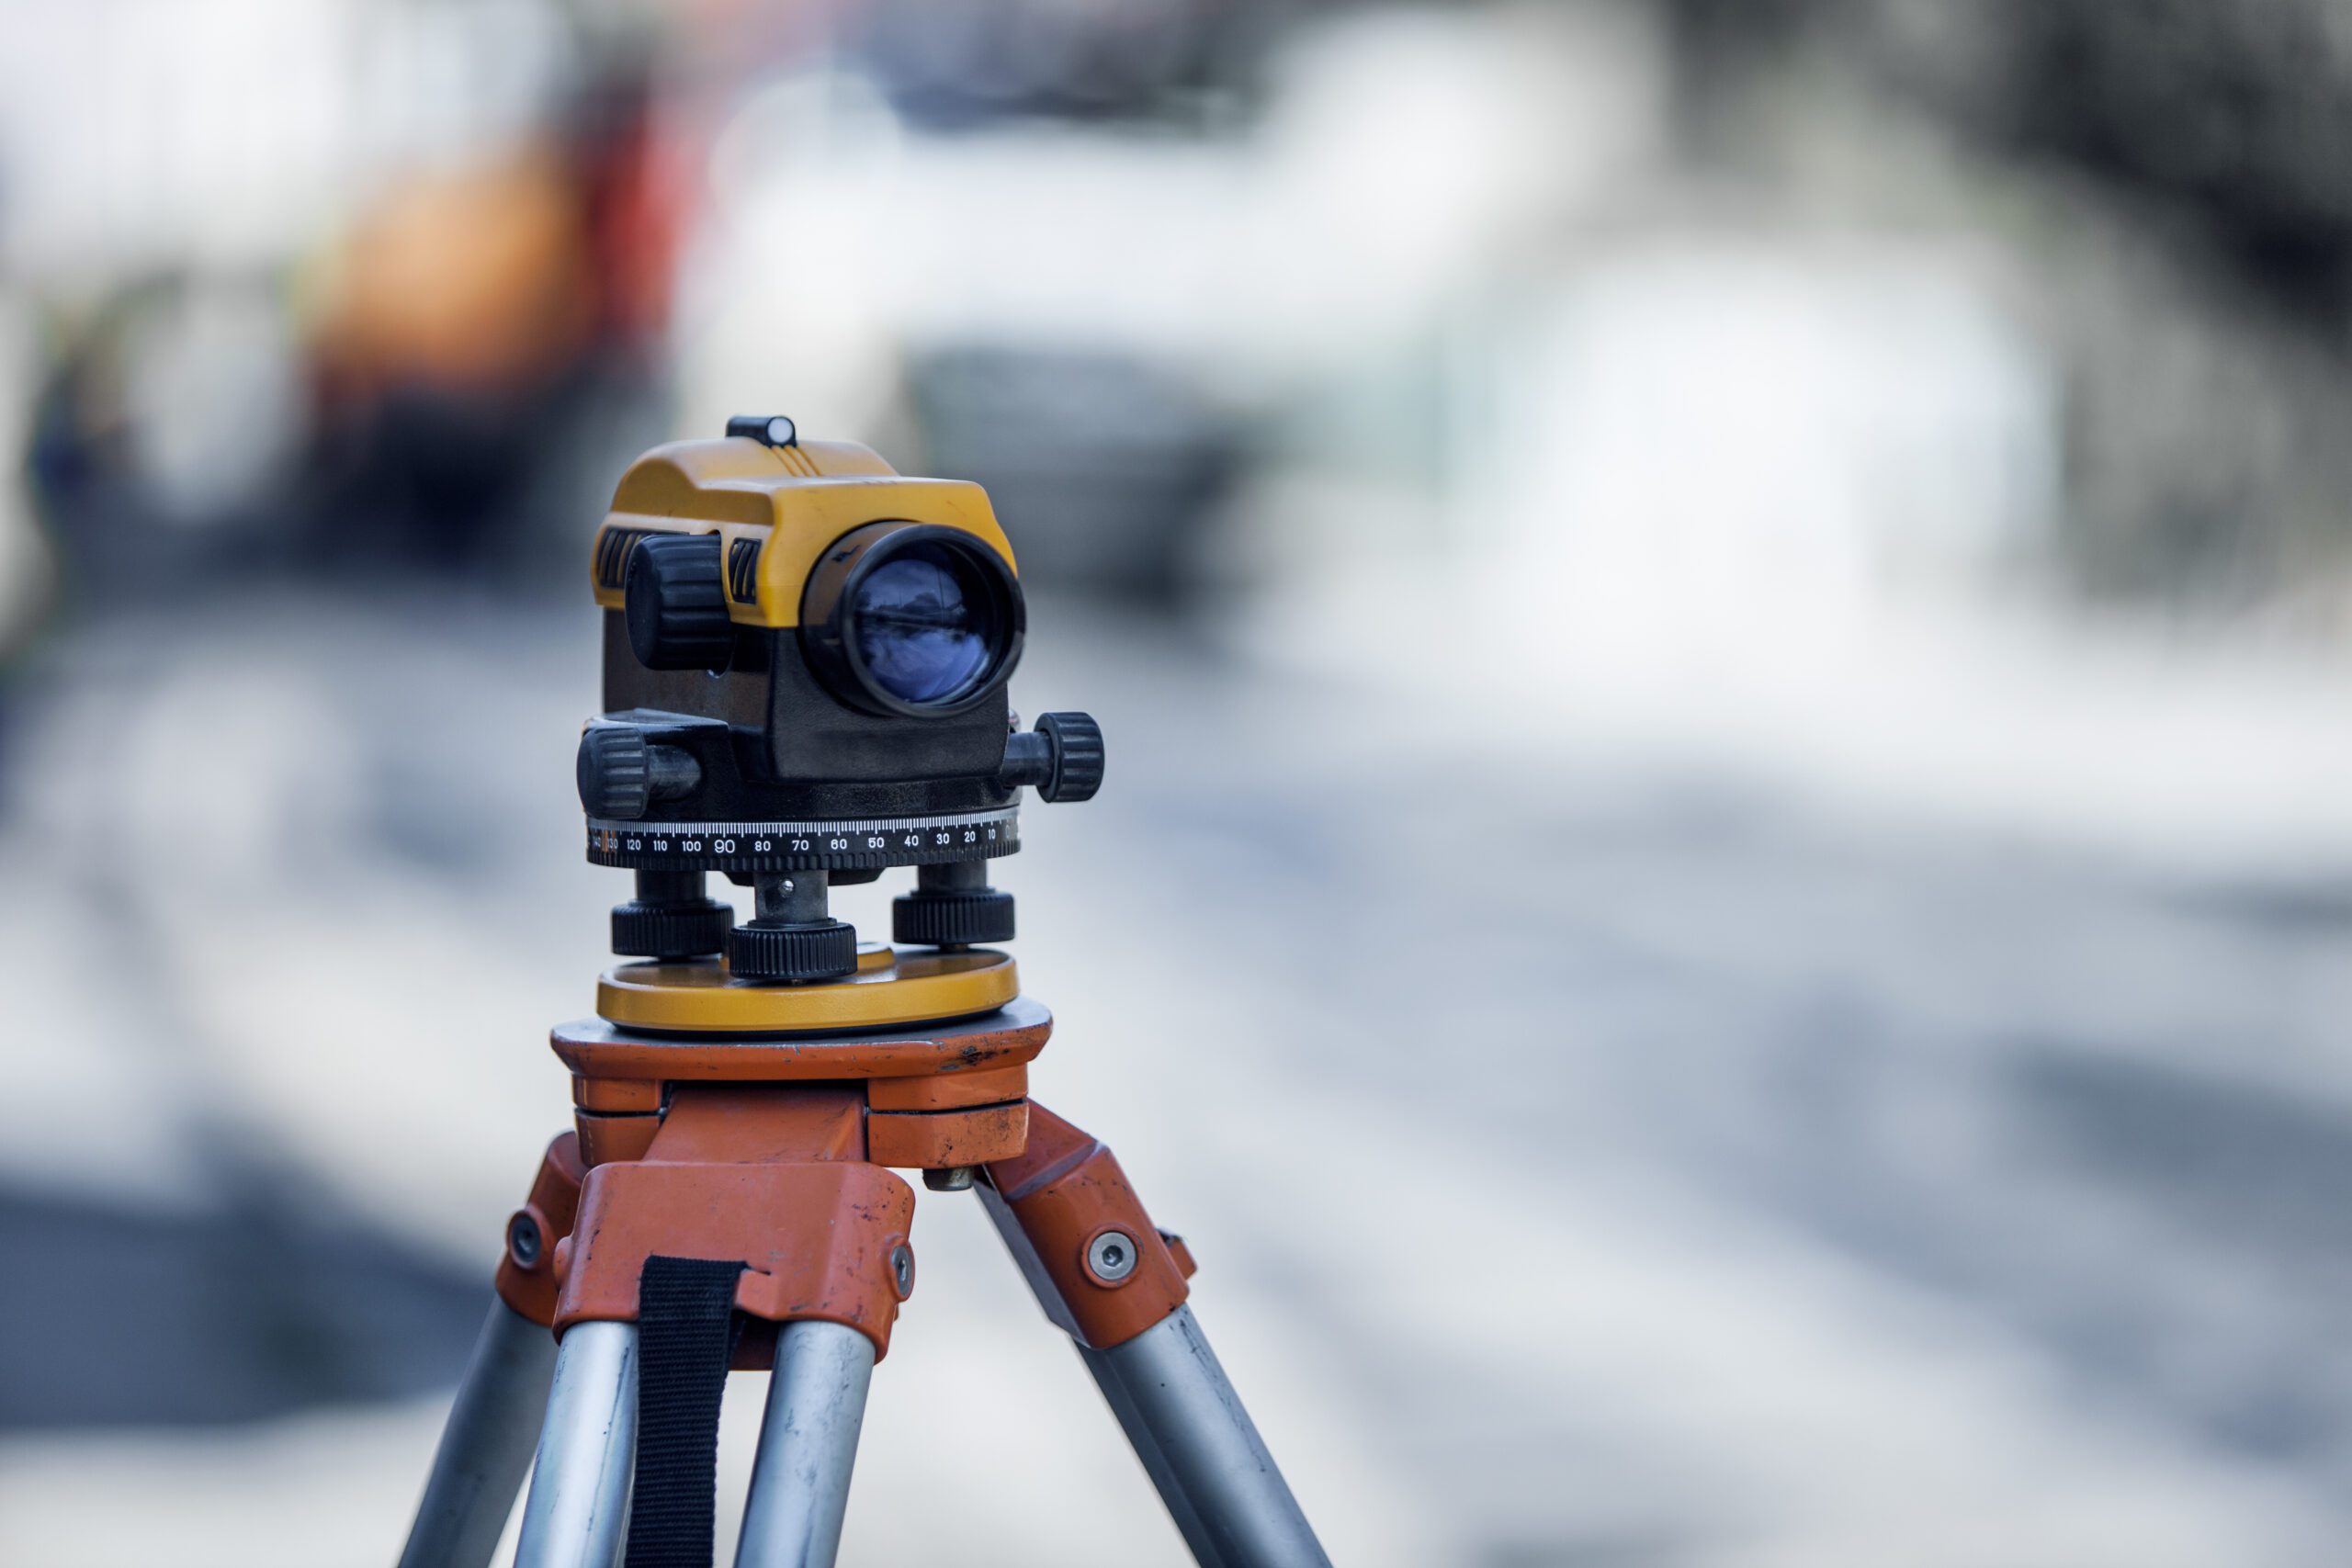 Survey work camera for construction surveying in Franklin, TN